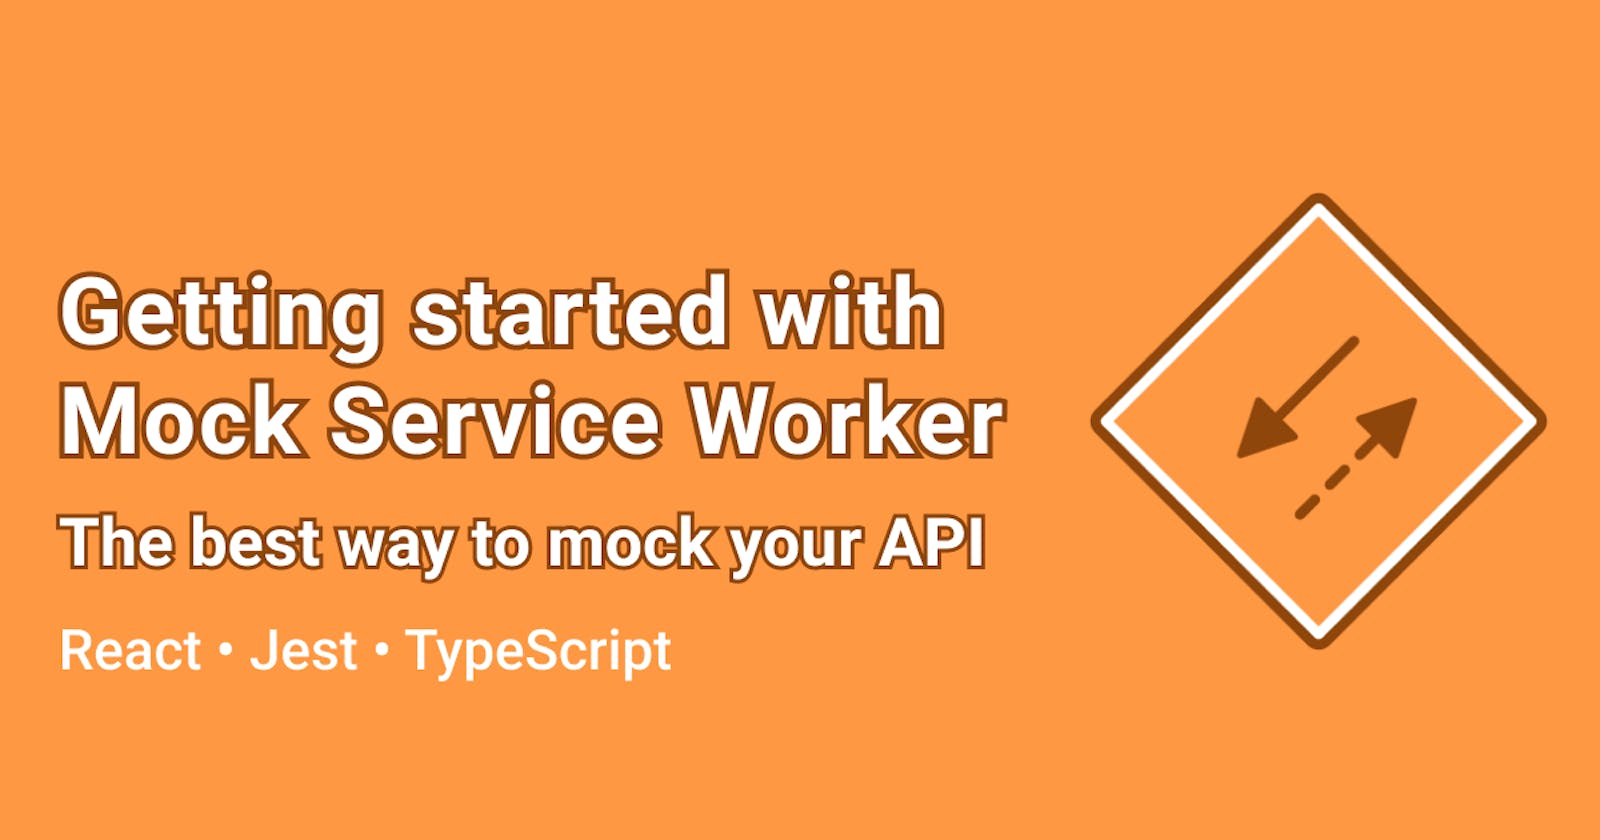 Tutorial: Mock Service Worker is the best way to mock your API